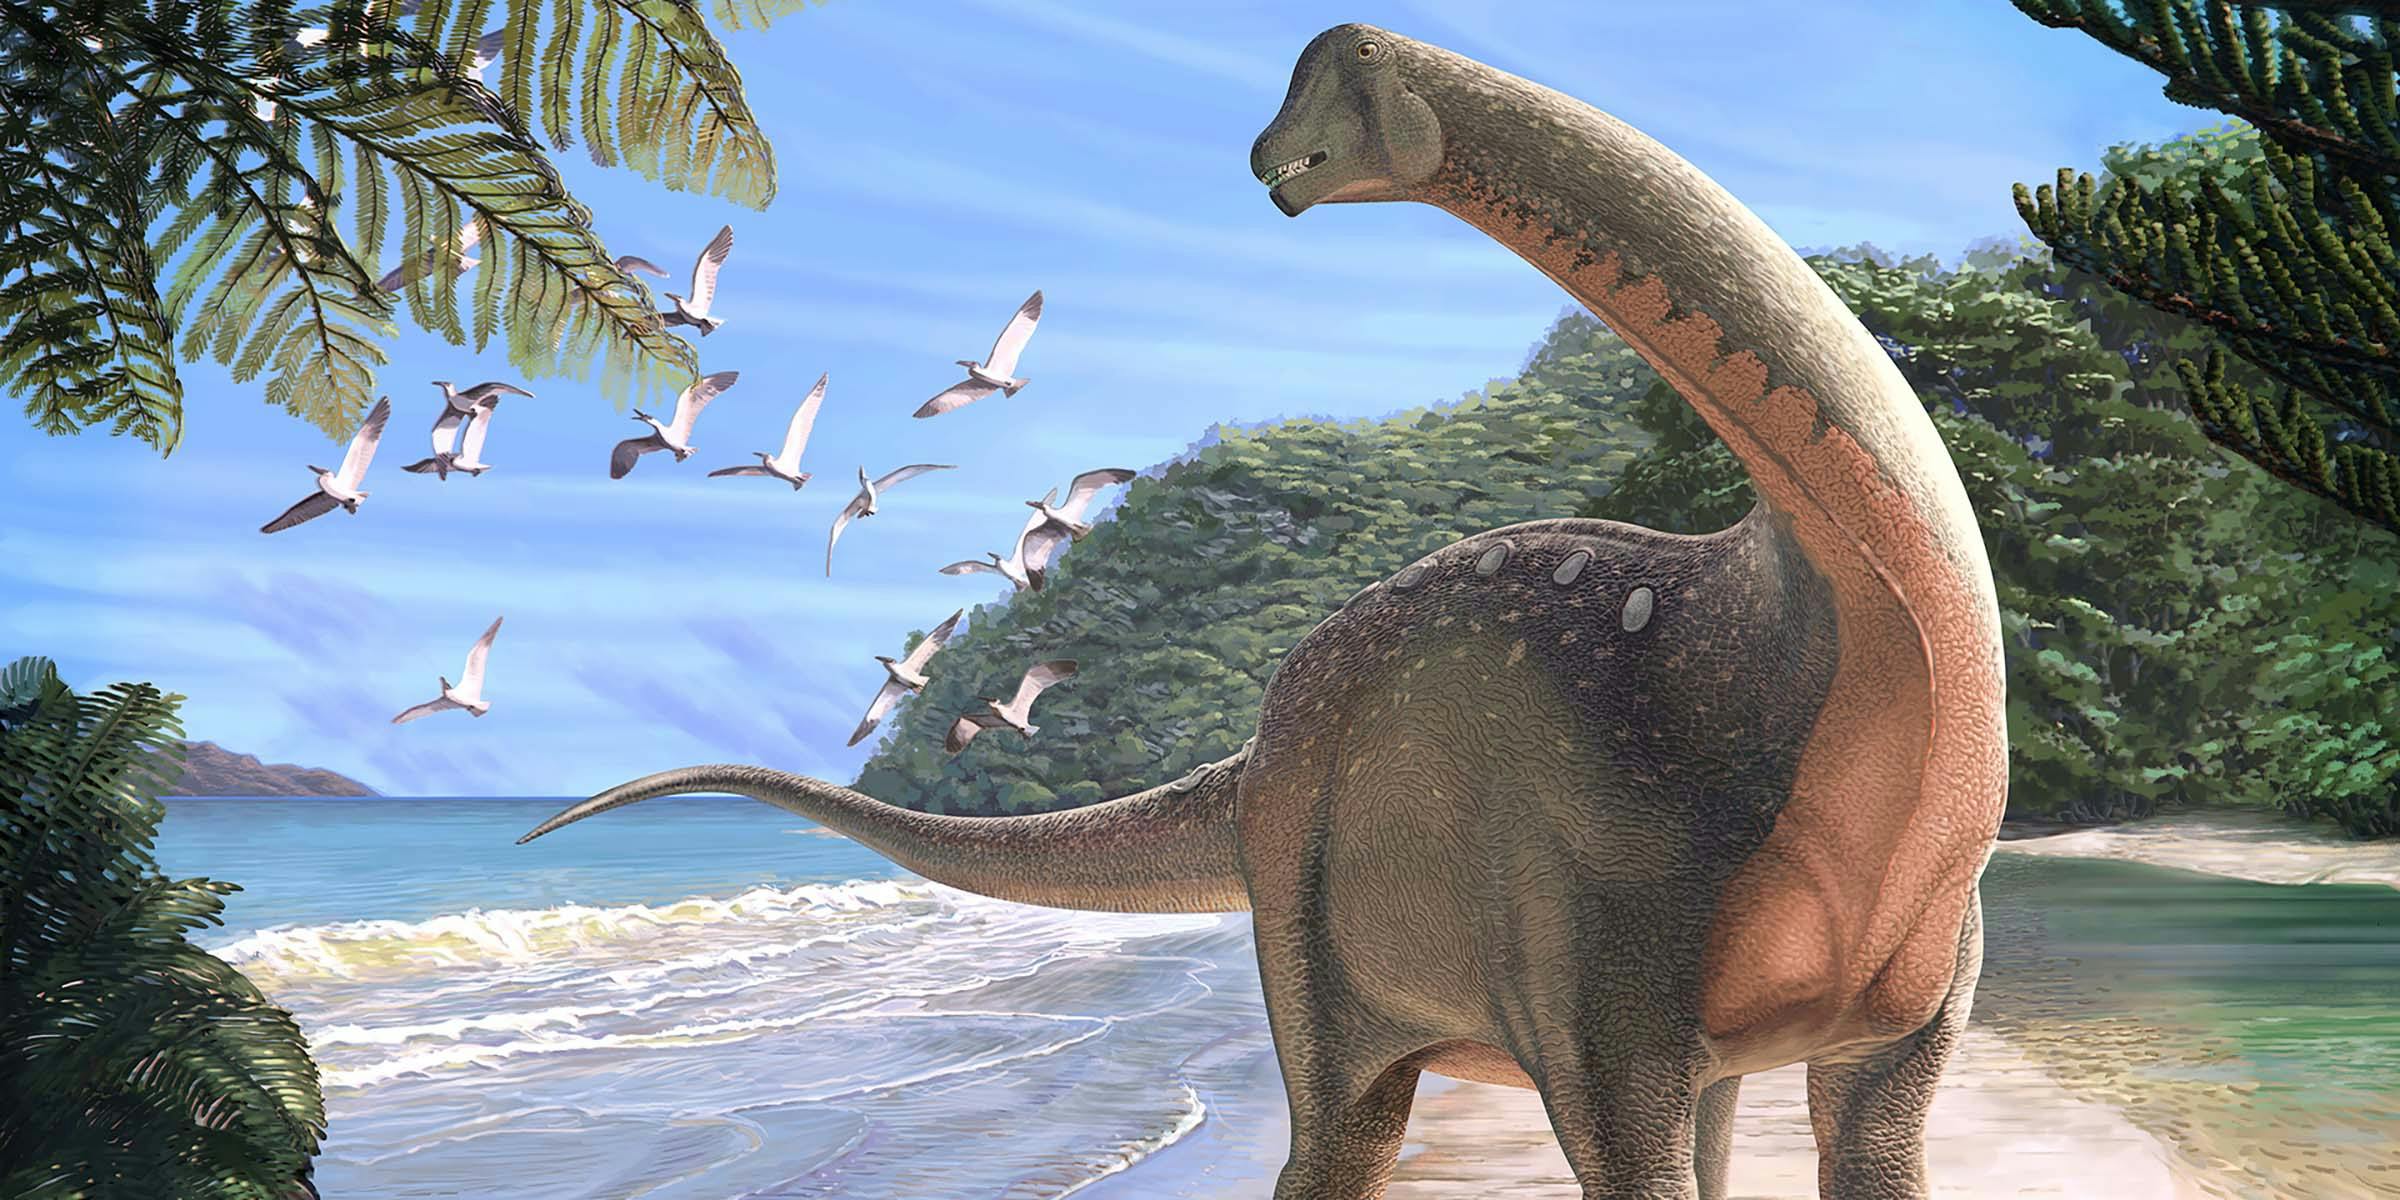 Illustration of a large, long-necked dinosaur on a tropical beach